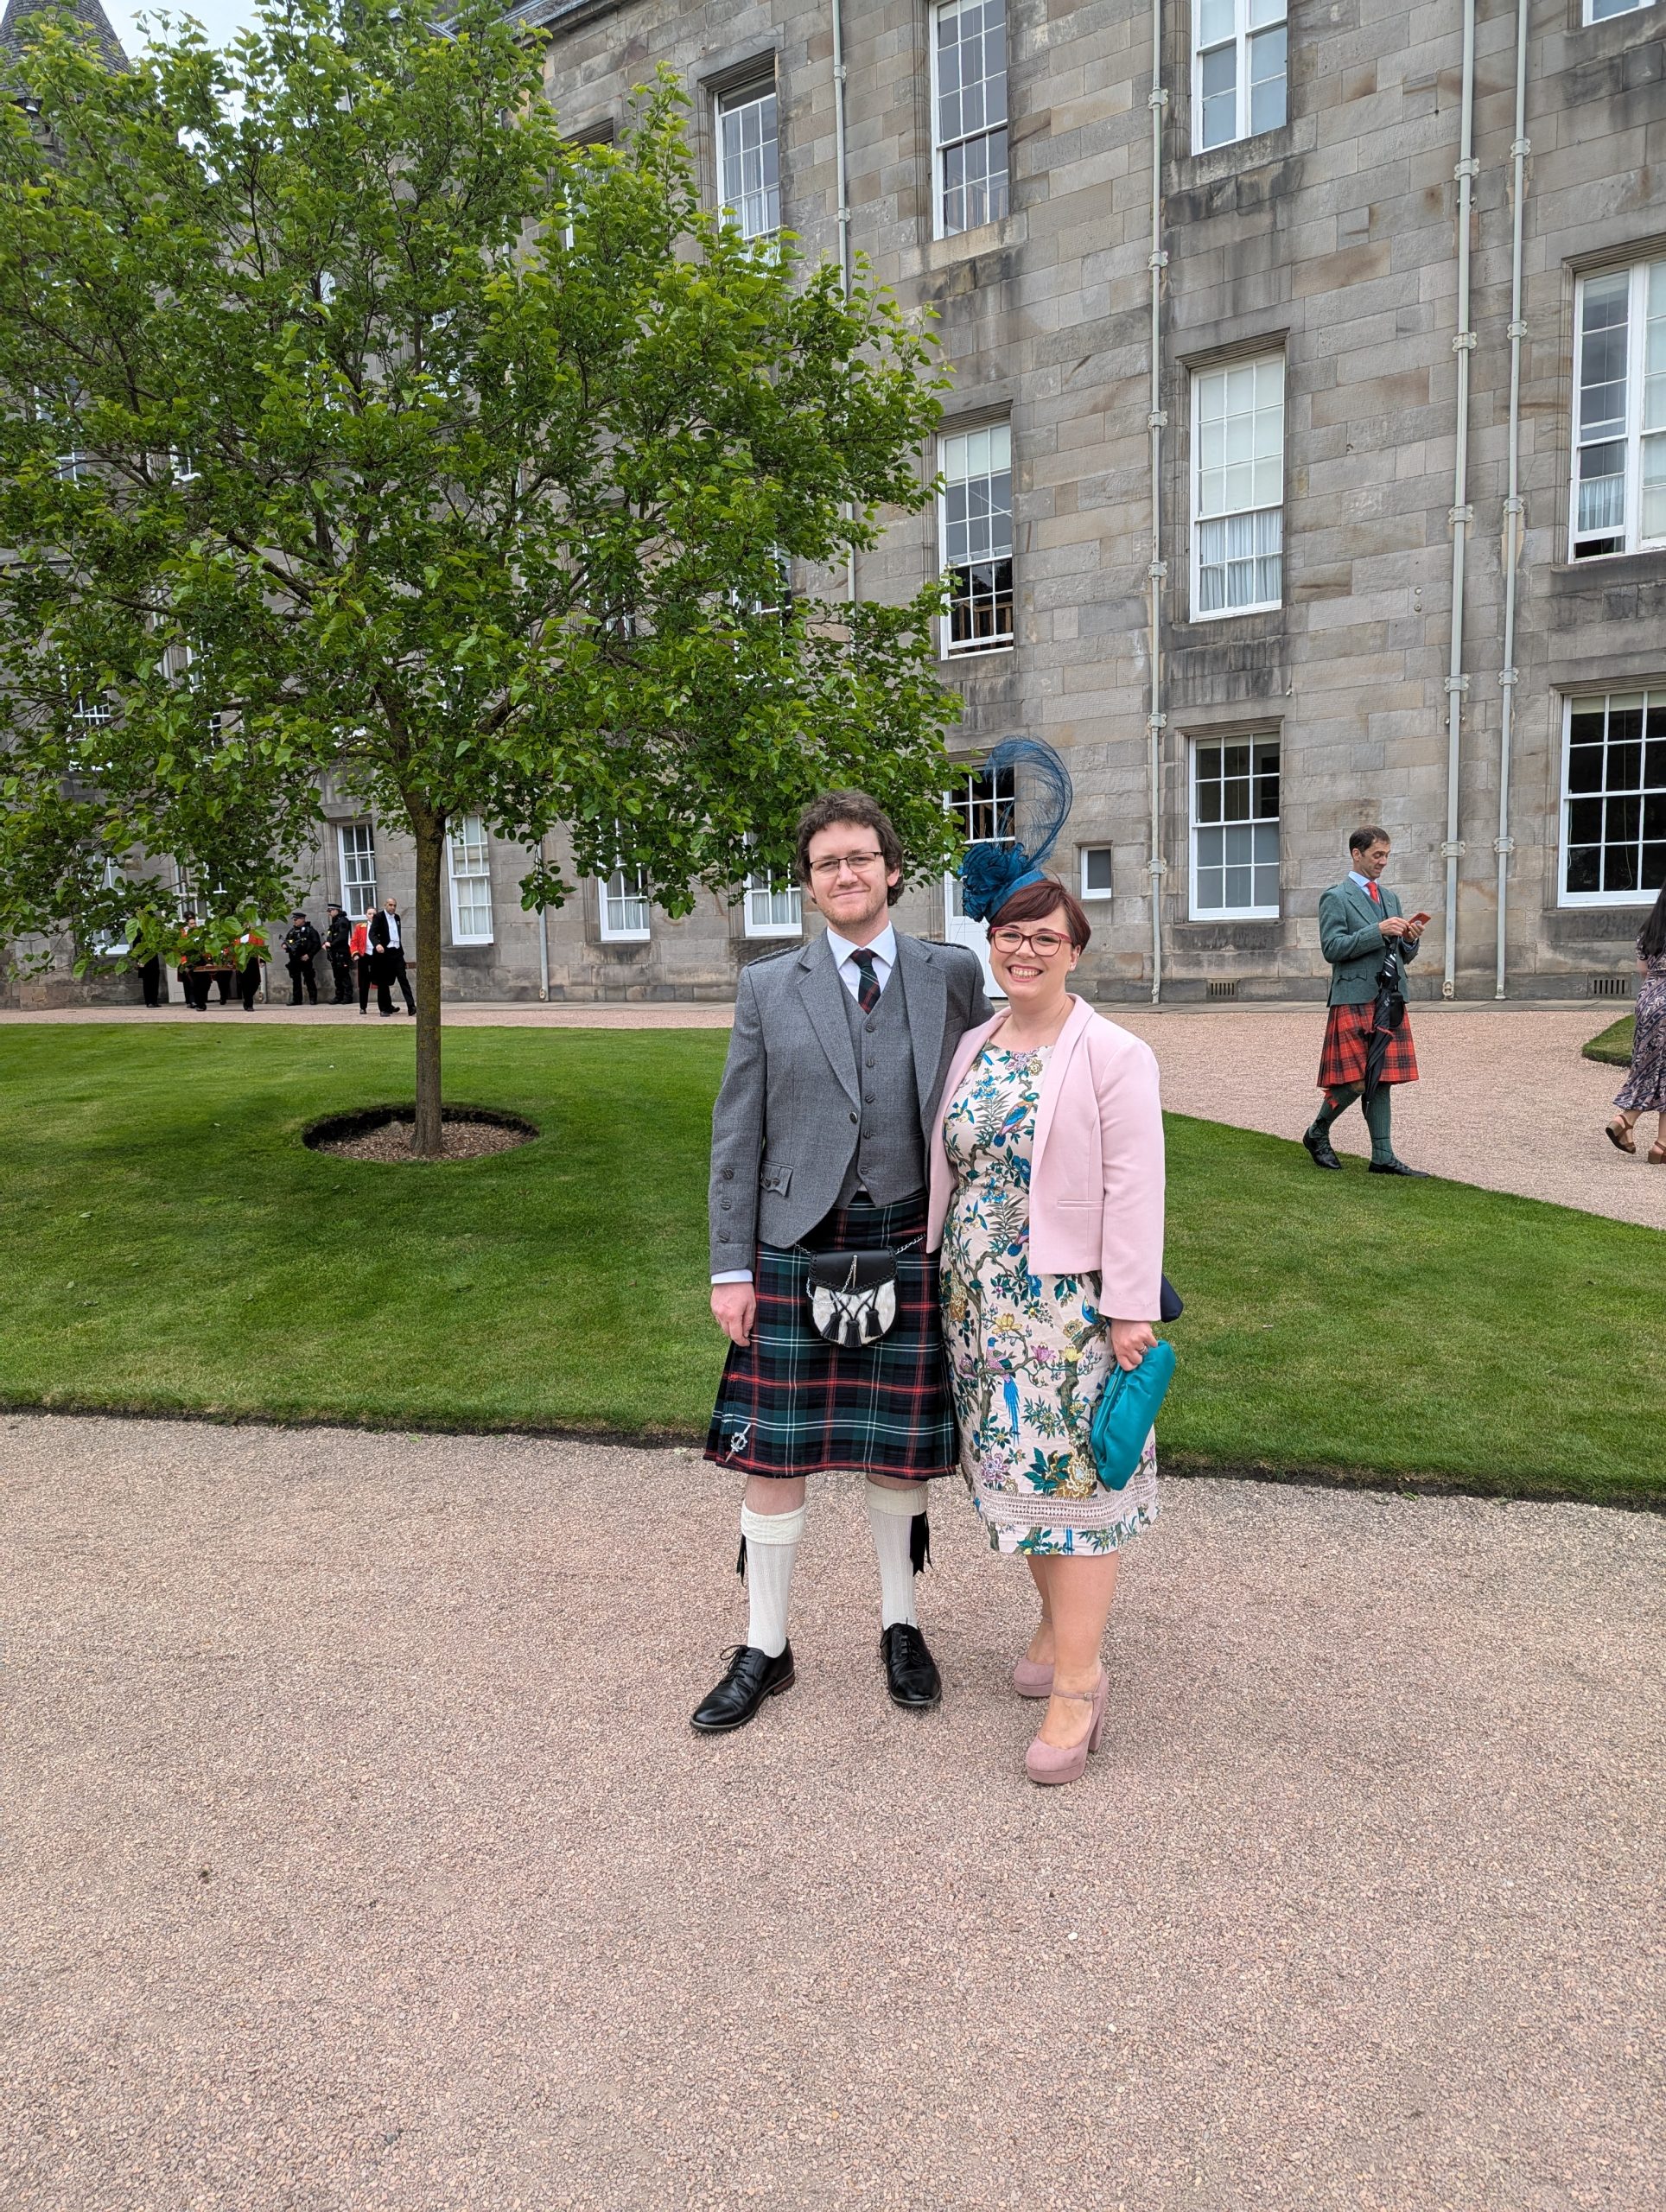 Palace of Holyroodhouse Garden Party